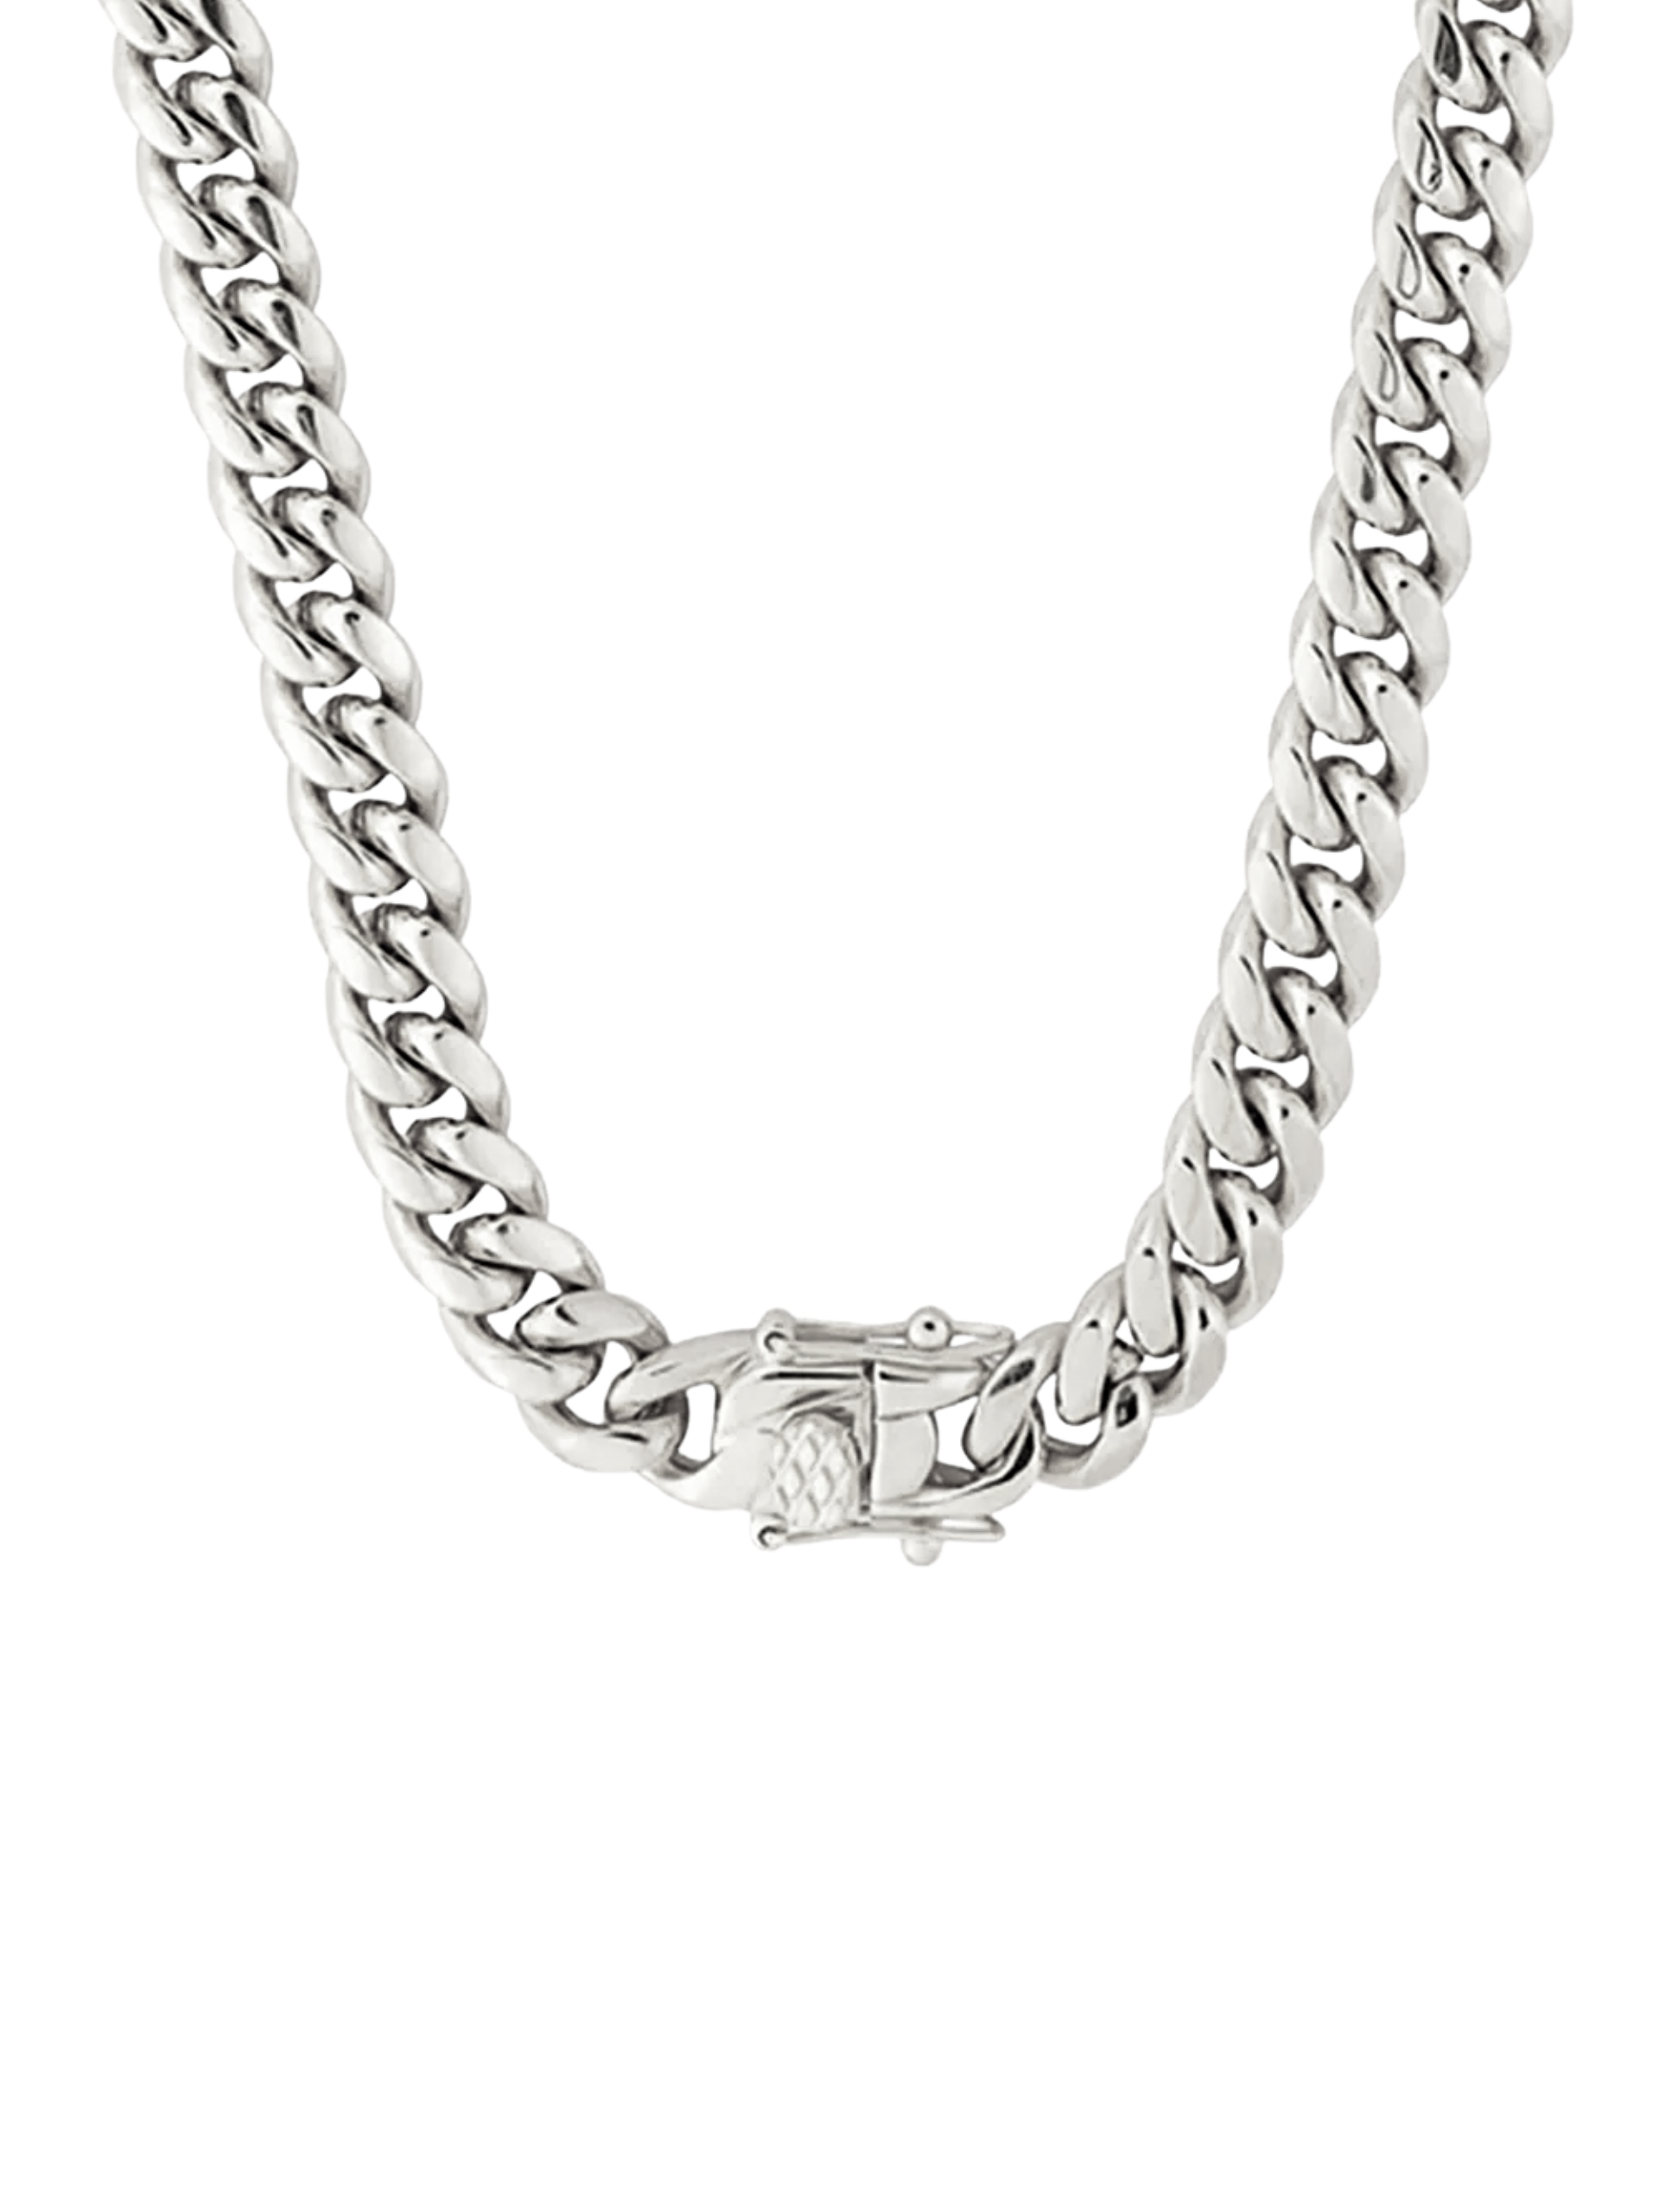 Isobel s necklace - silver